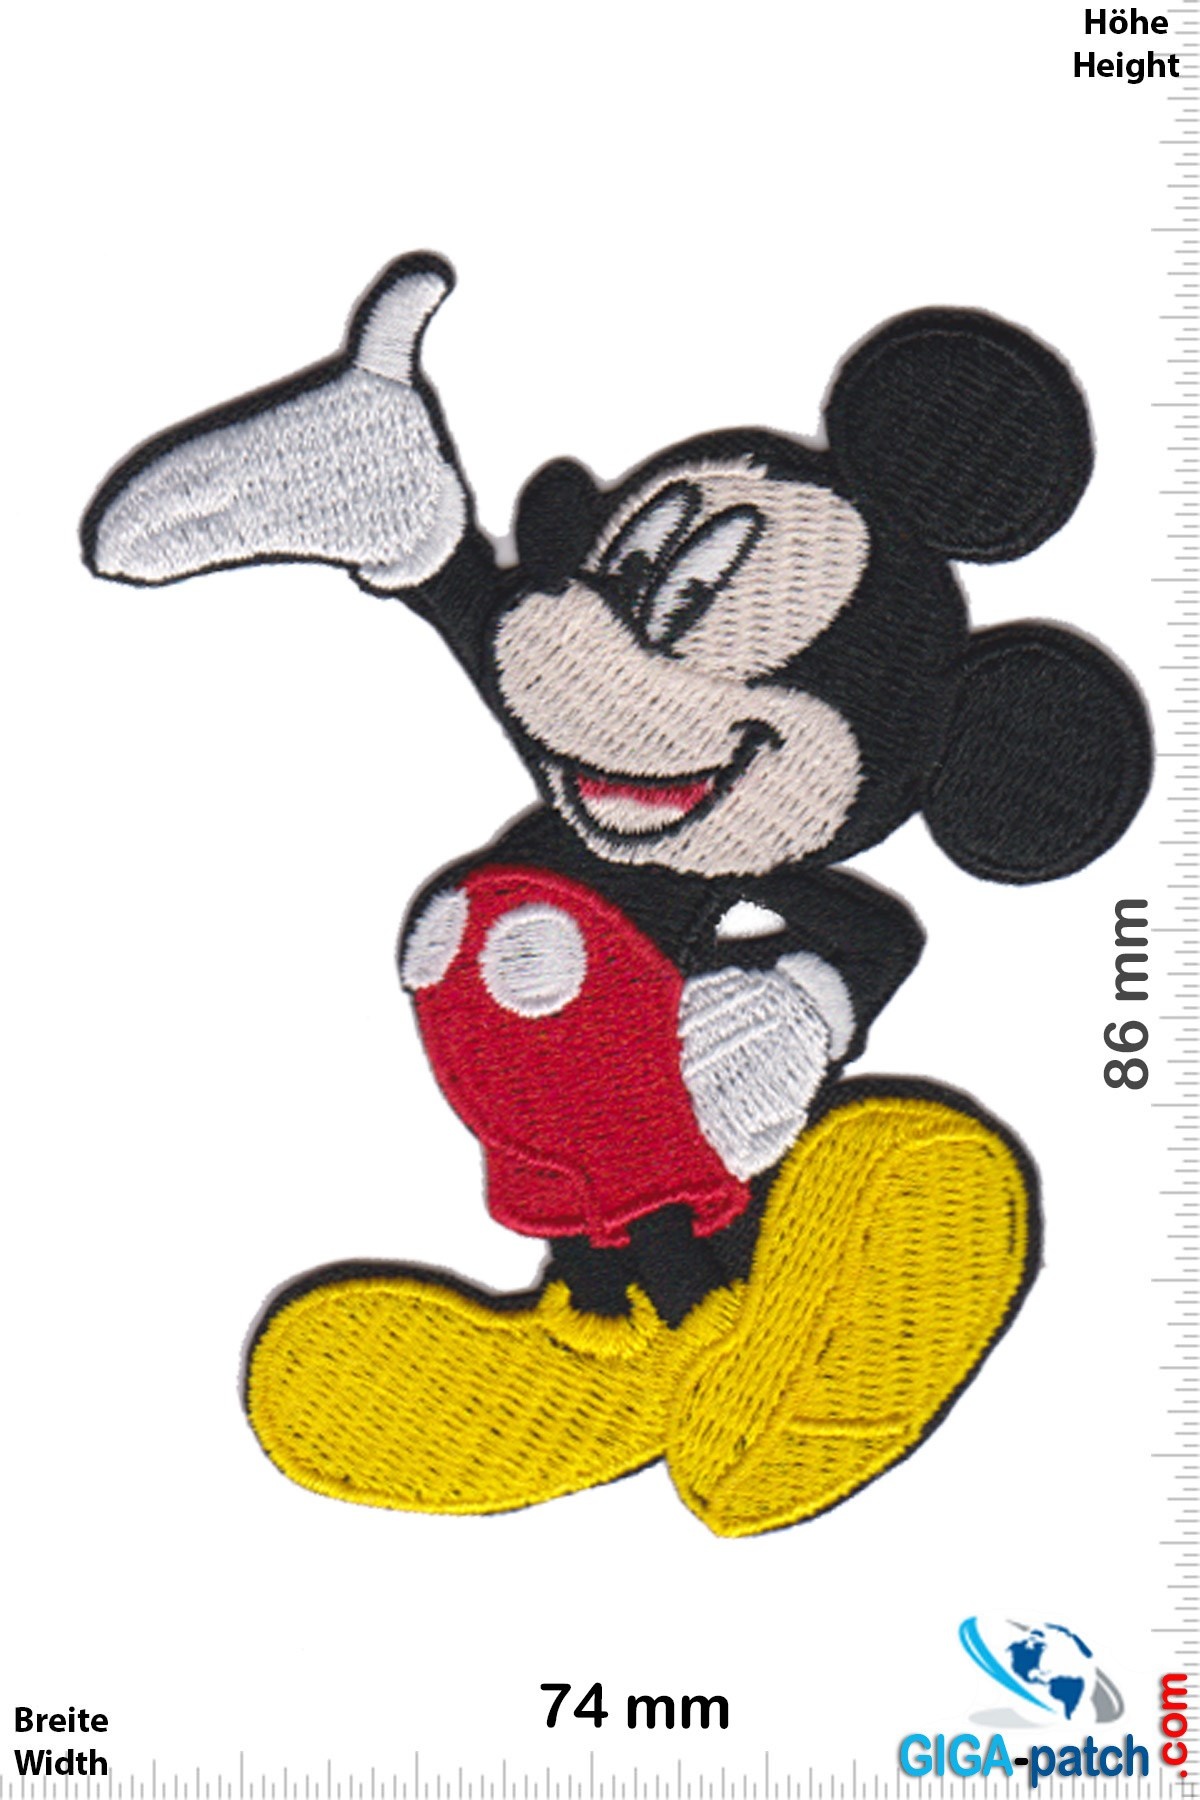 Mickey patches iron on patch Iron on Embroidered Embroidered Iron on Patch